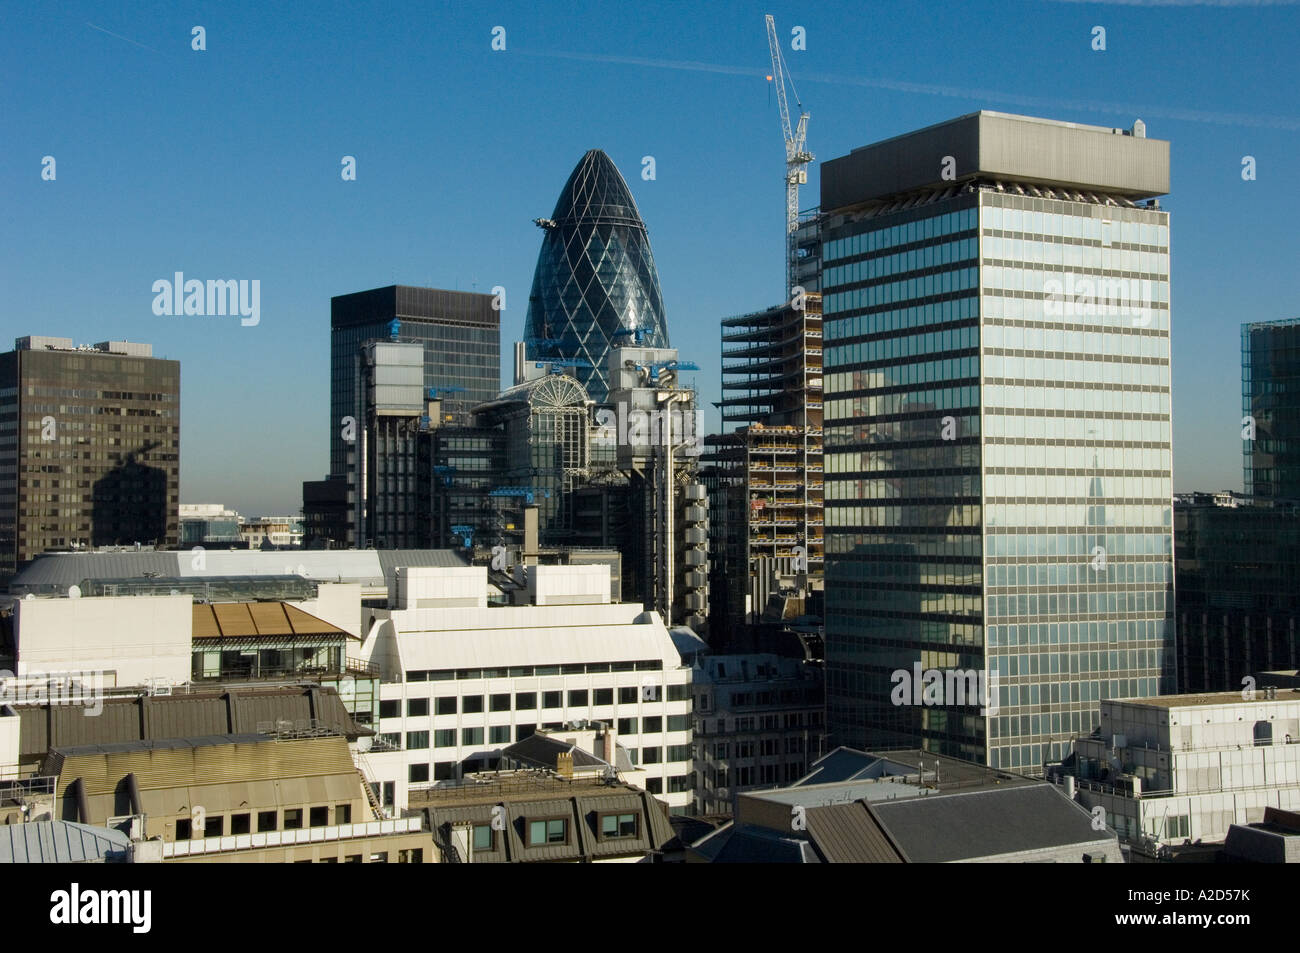 Rooftop view of the square mile in the City of London Stock Photo